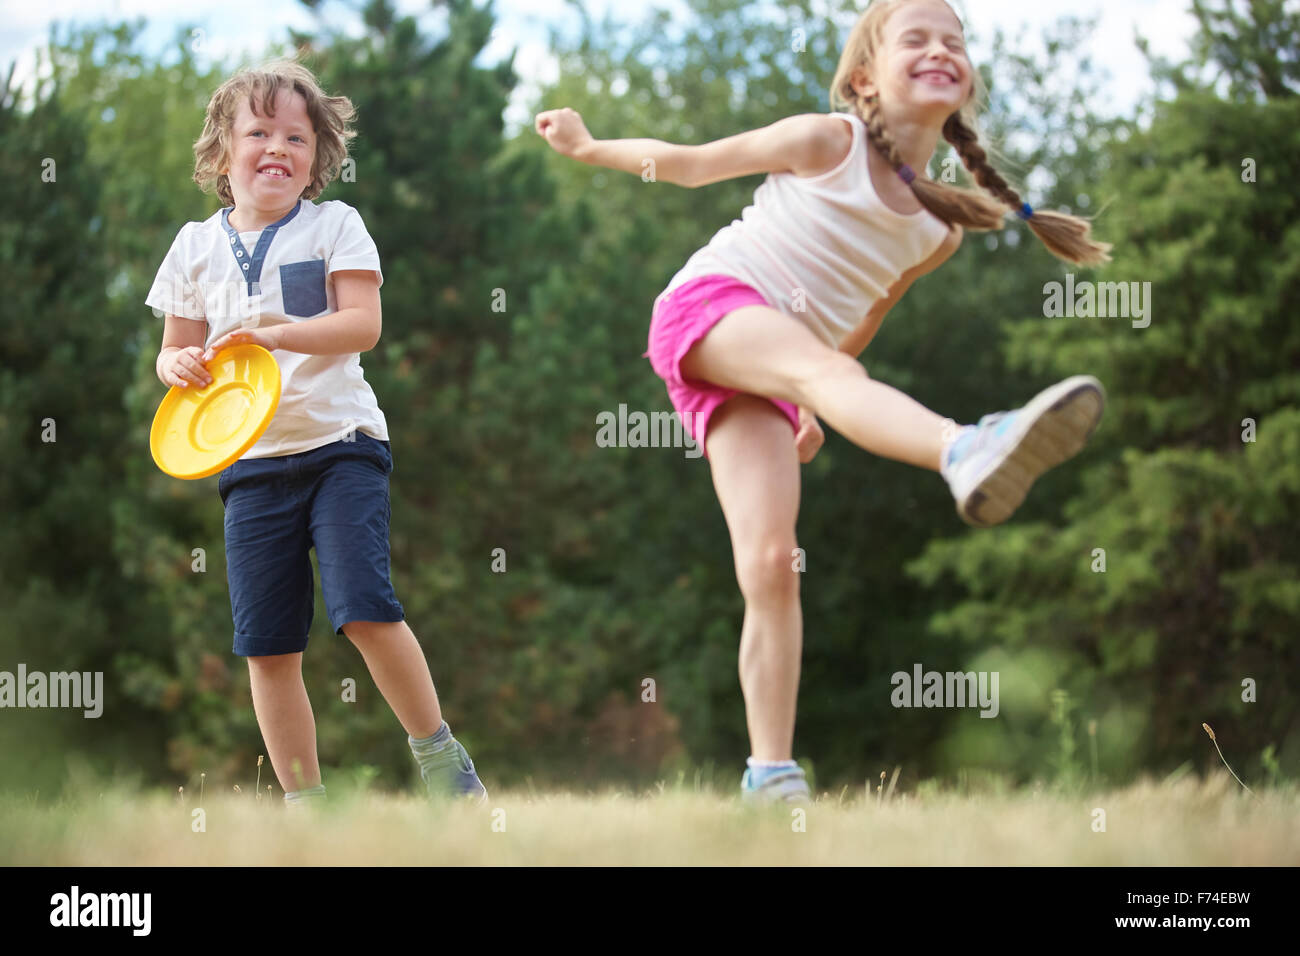 Girl and boy play happily with their frisbee and have fun Stock Photo